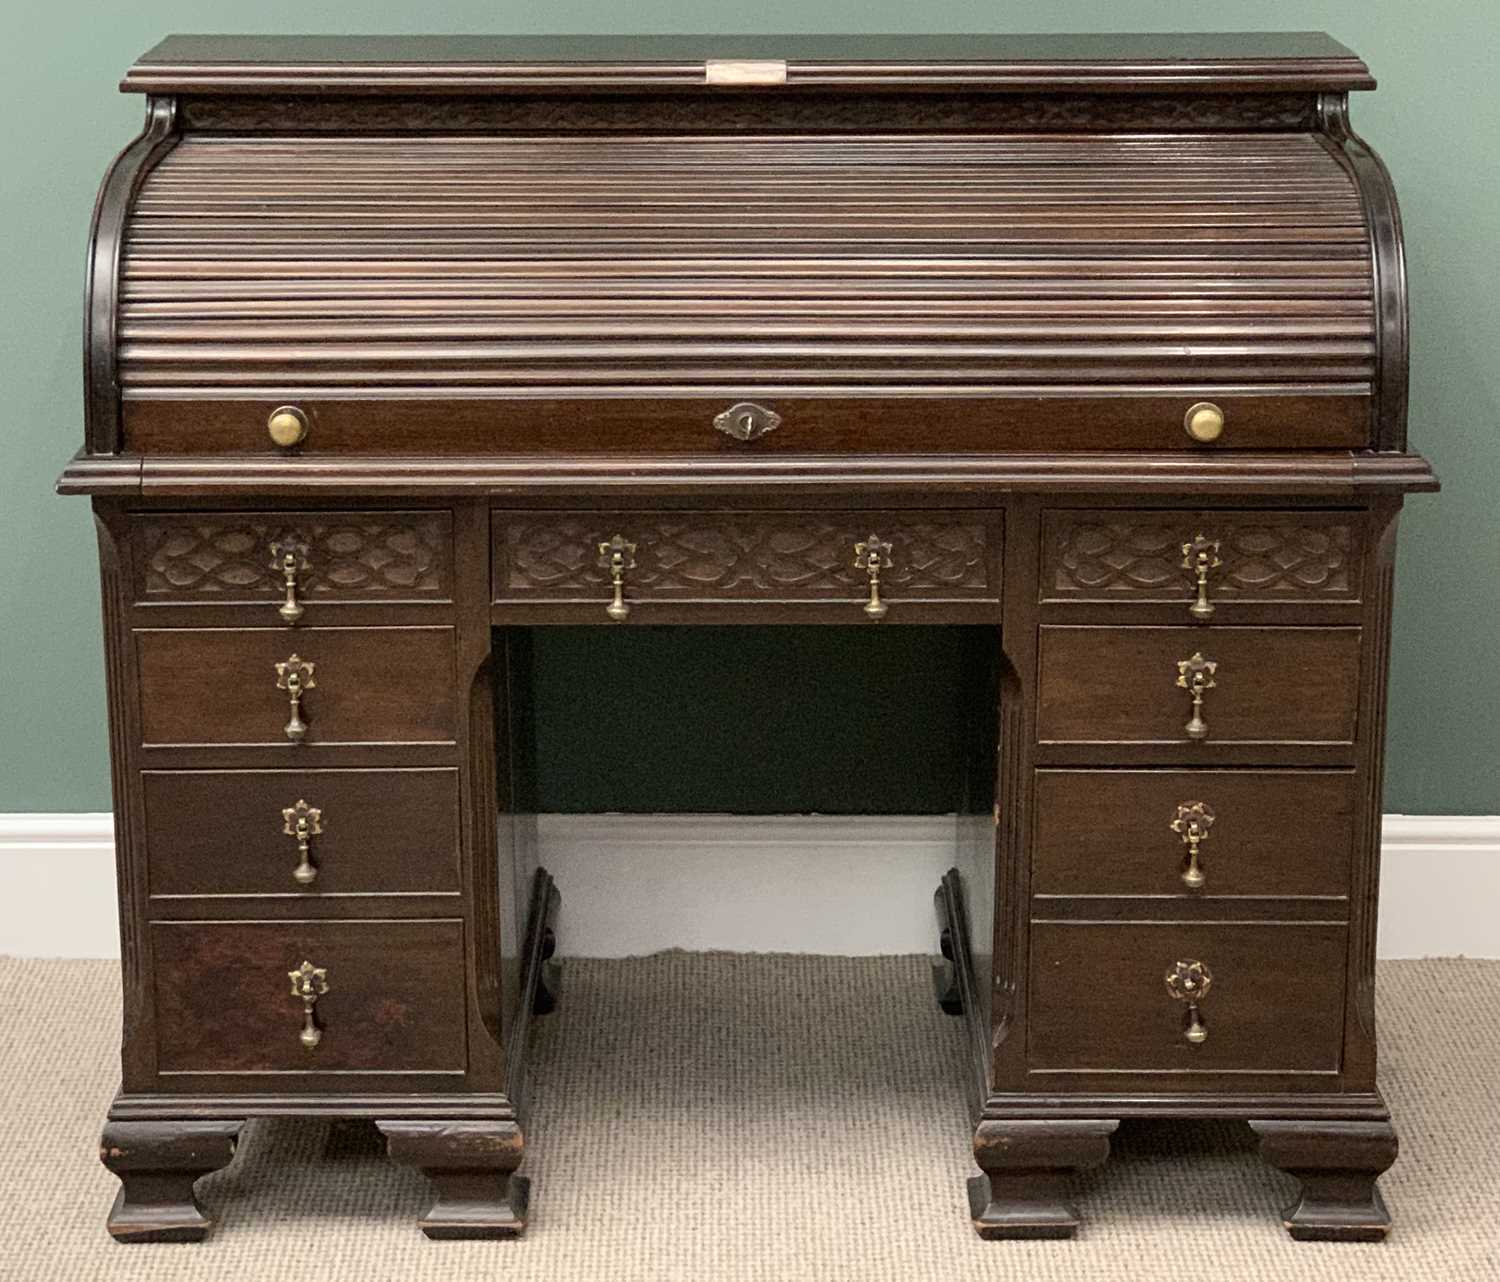 CIRCA 1900 MAHOGANY ROLL TOP DESK, quality example with twin pedestals having a tambour top, fine